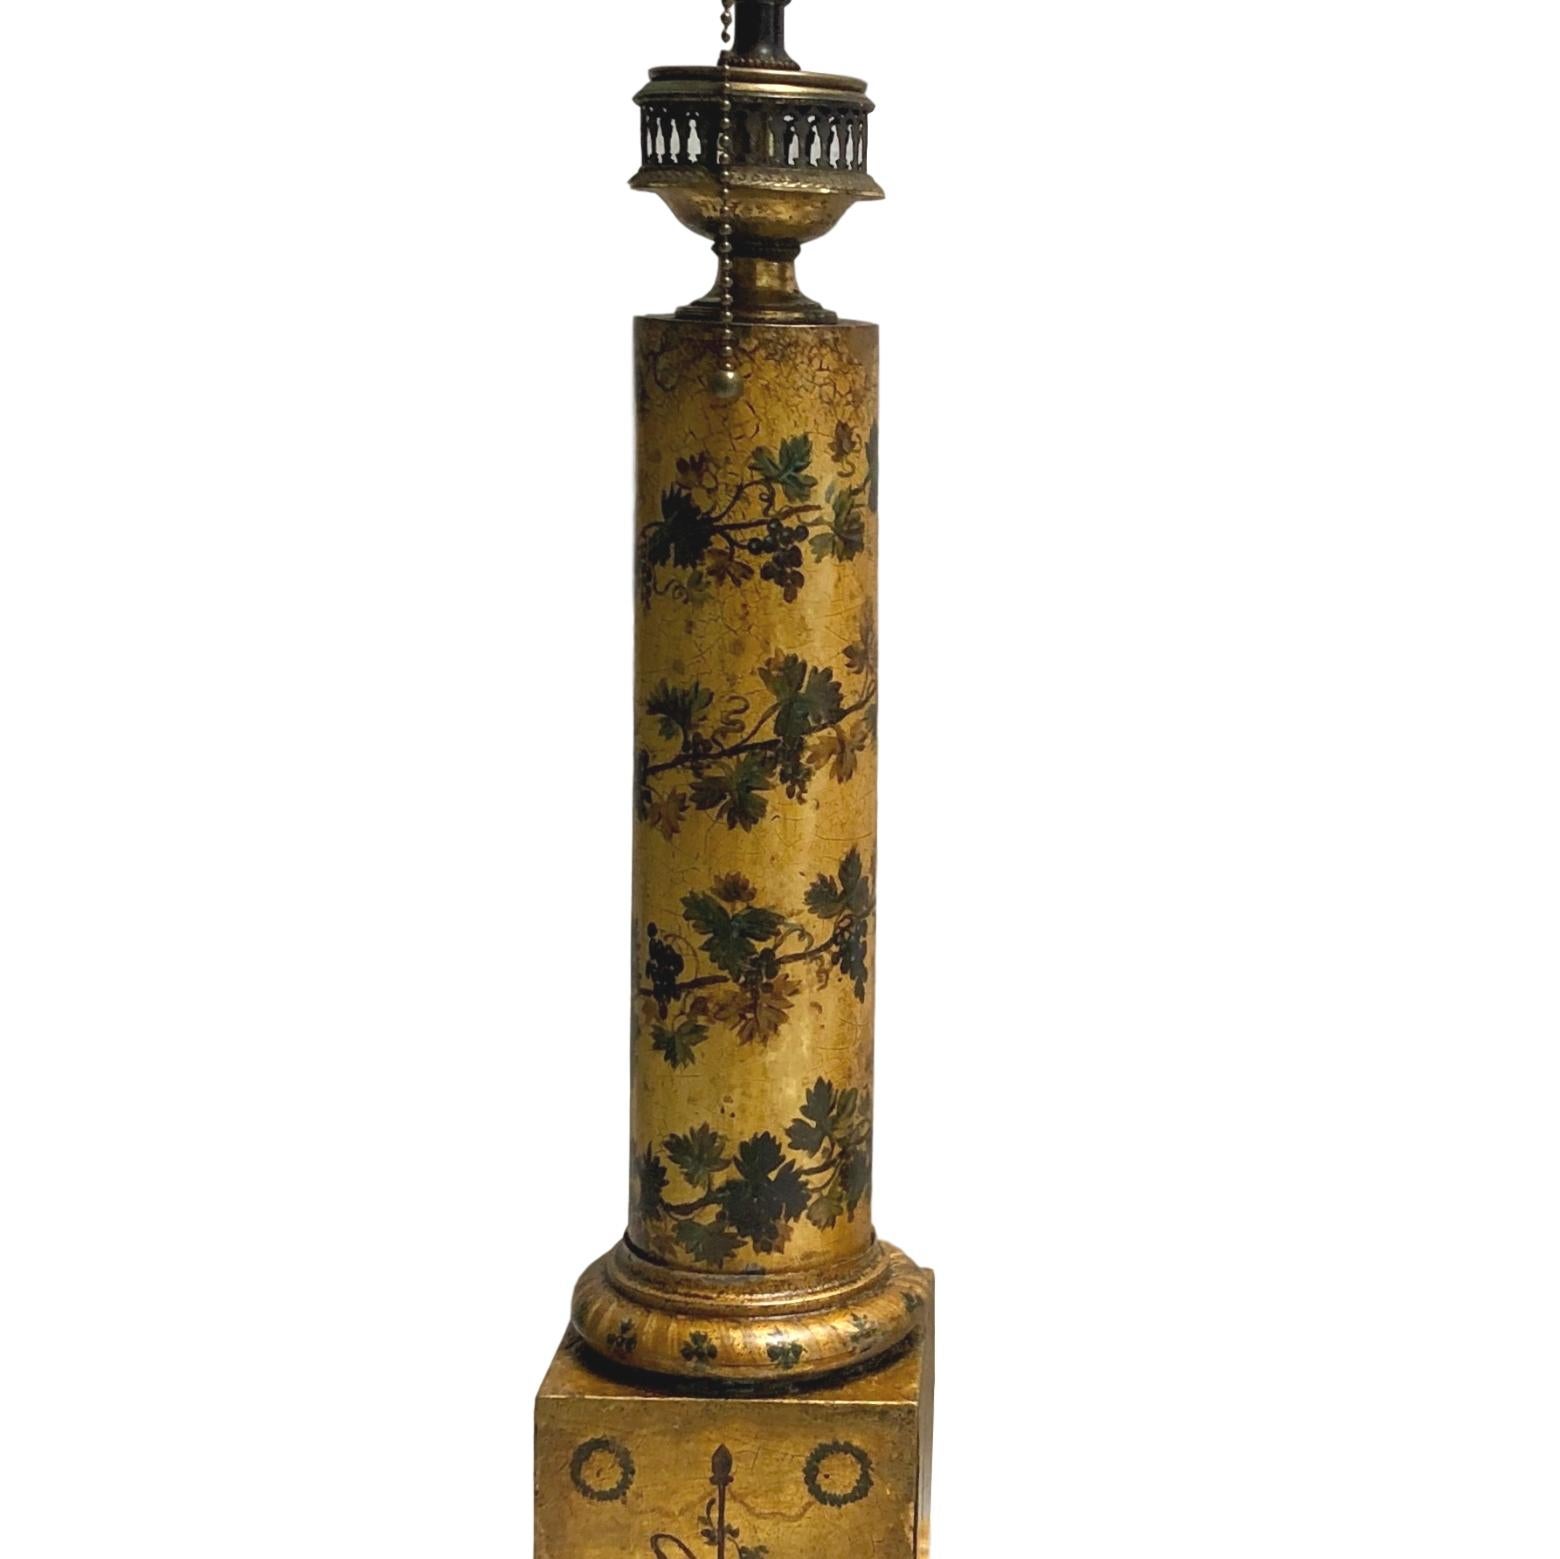 Pair of French circa 1920s gilt and painted tole lamps with foliage motif on a neoclassic column body.

Measurements:
Height of body: 19.5